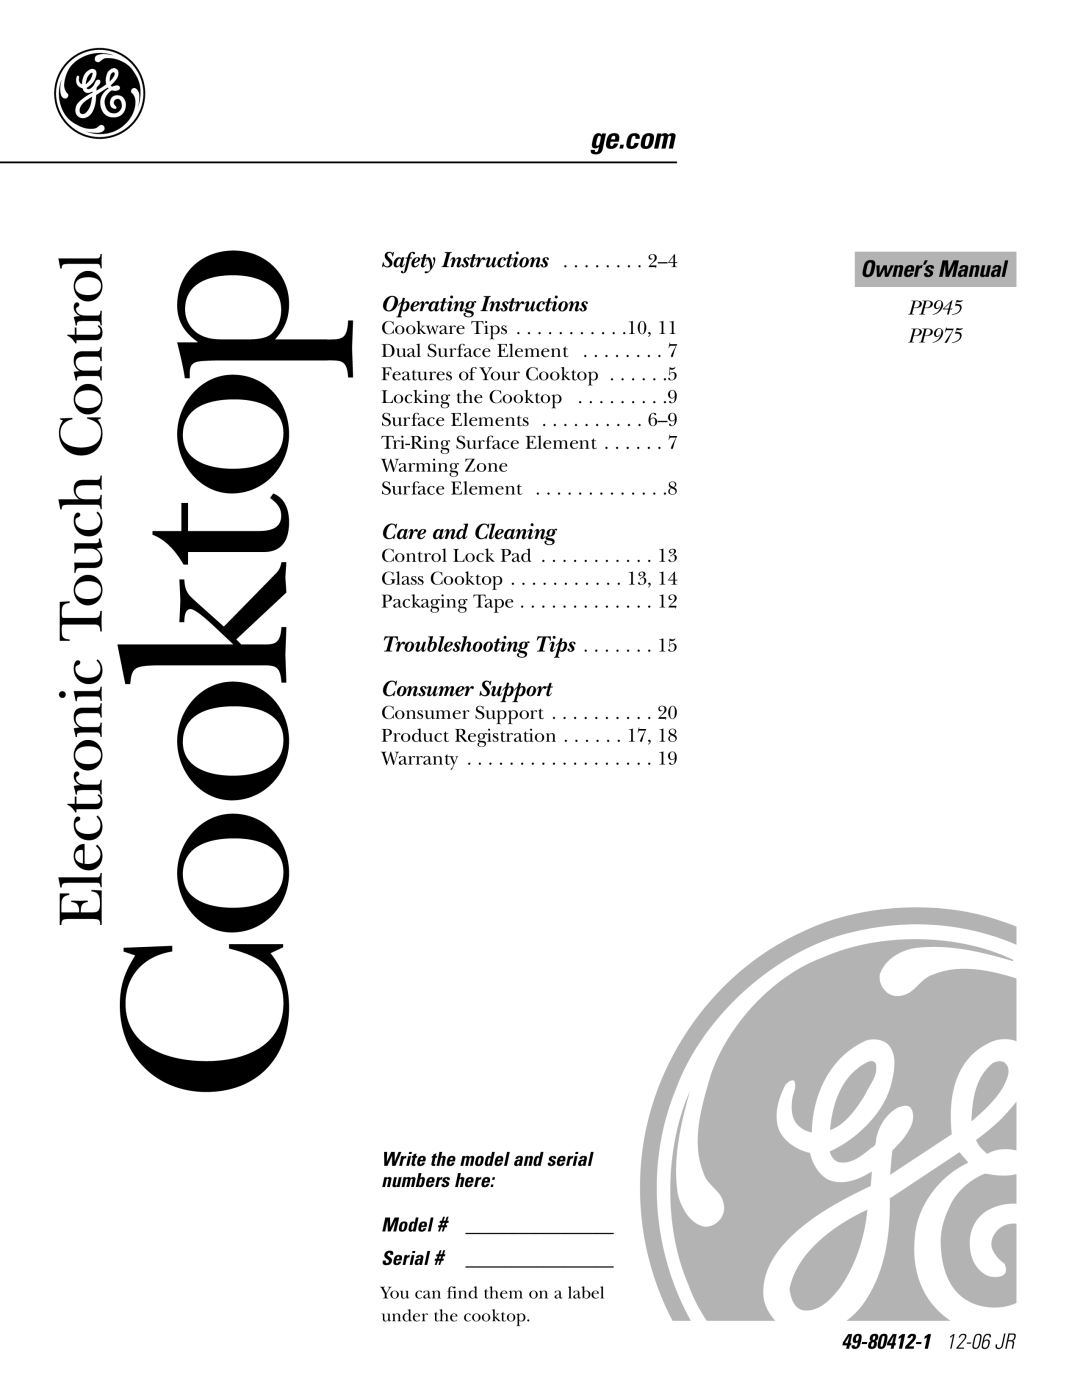 GE manual Technical Service Guide, Proﬁle 30- and 36-in Cooktops, GE Consumer & Industrial, January, PP945 PP975, + - + 